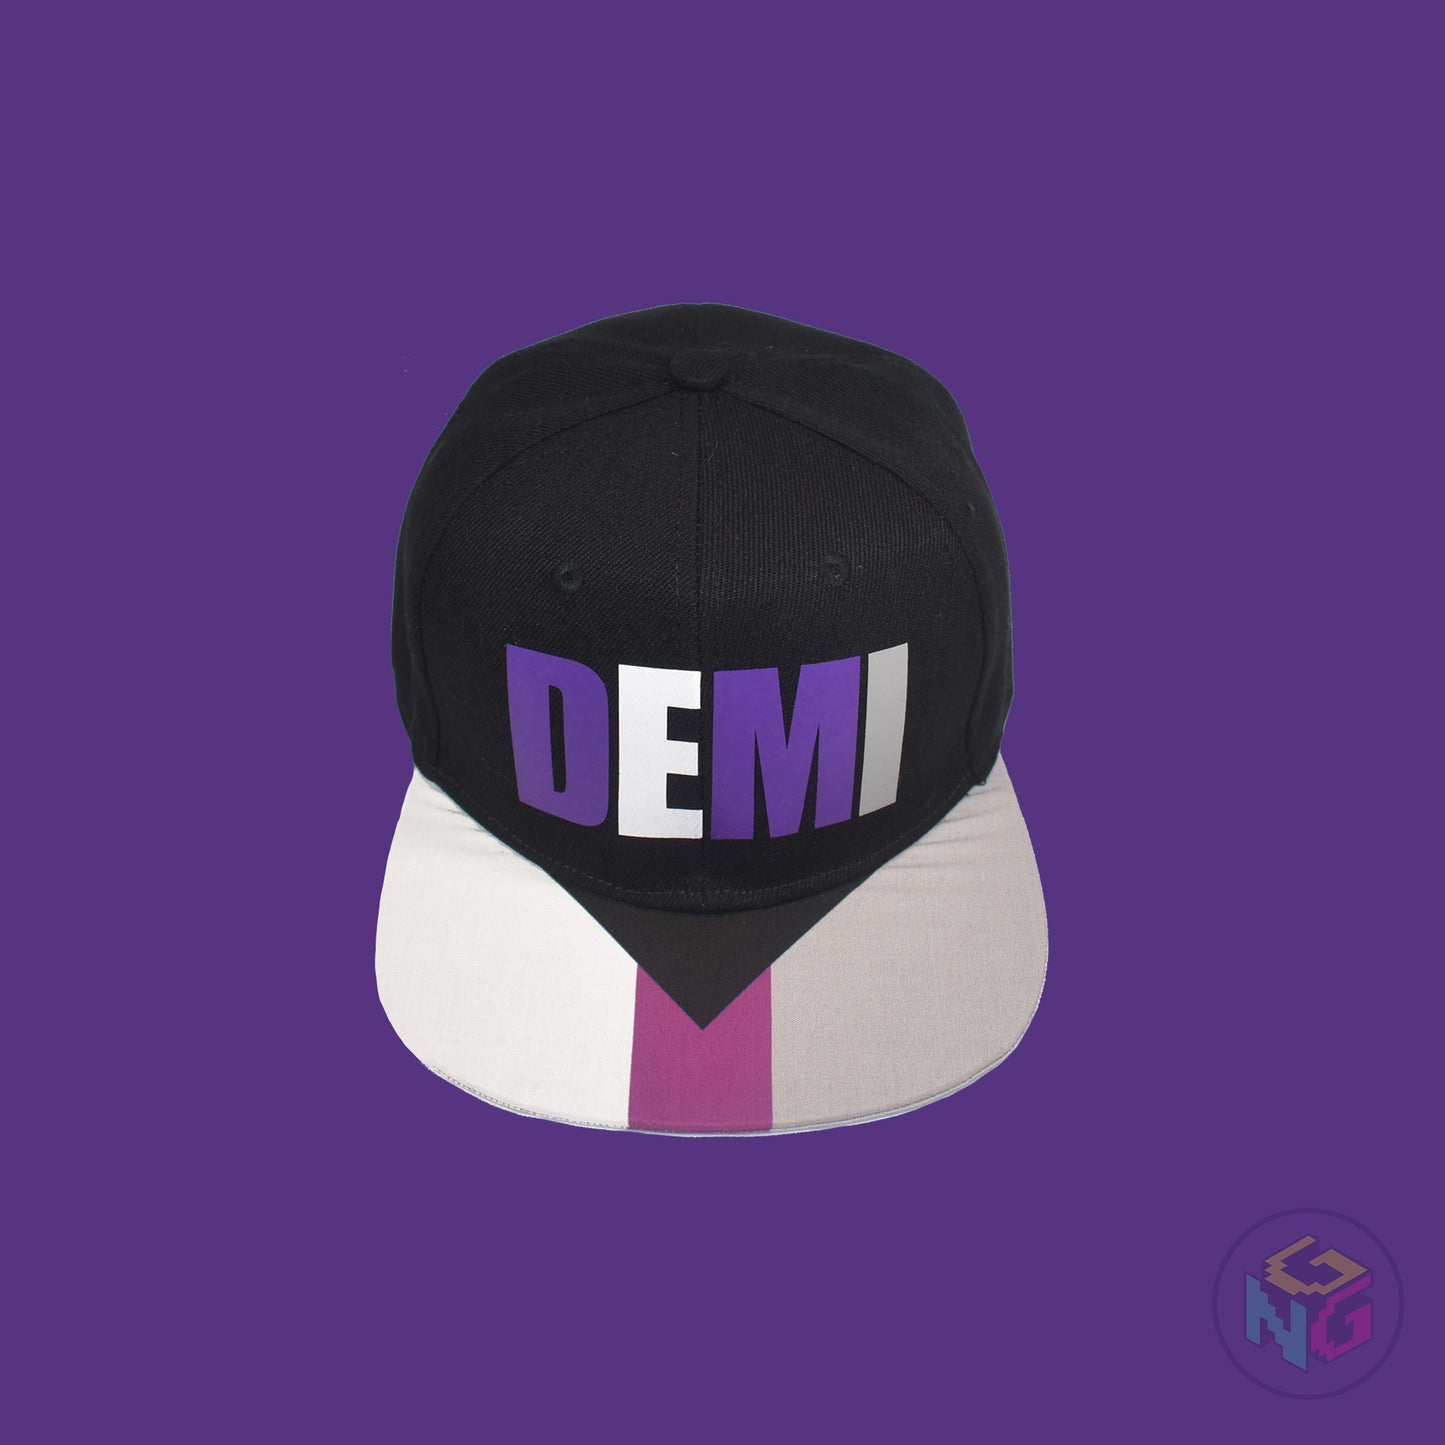 Black flat bill snapback hat. The brim has the demisexual pride flag on both sides and the front of the hat has the word “DEMI” in purple, white, and grey. Front top view